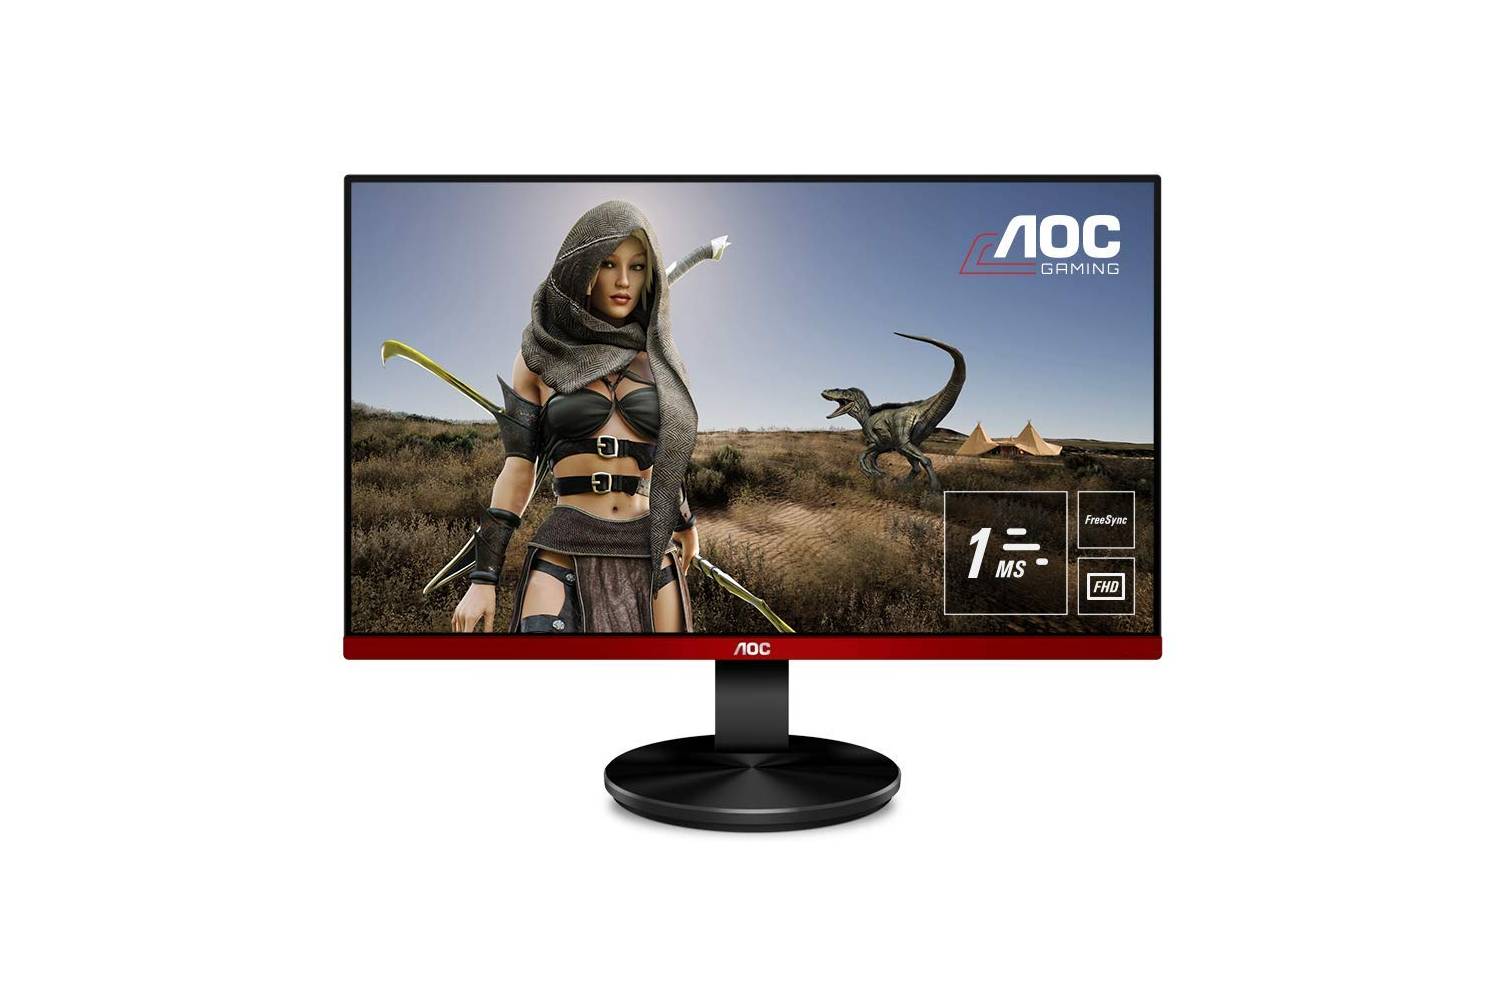 Aoc 24.5 inch LED Gaming Monitor Full HD, Free Sync, 75Hz, 1ms, in-Built Speaker